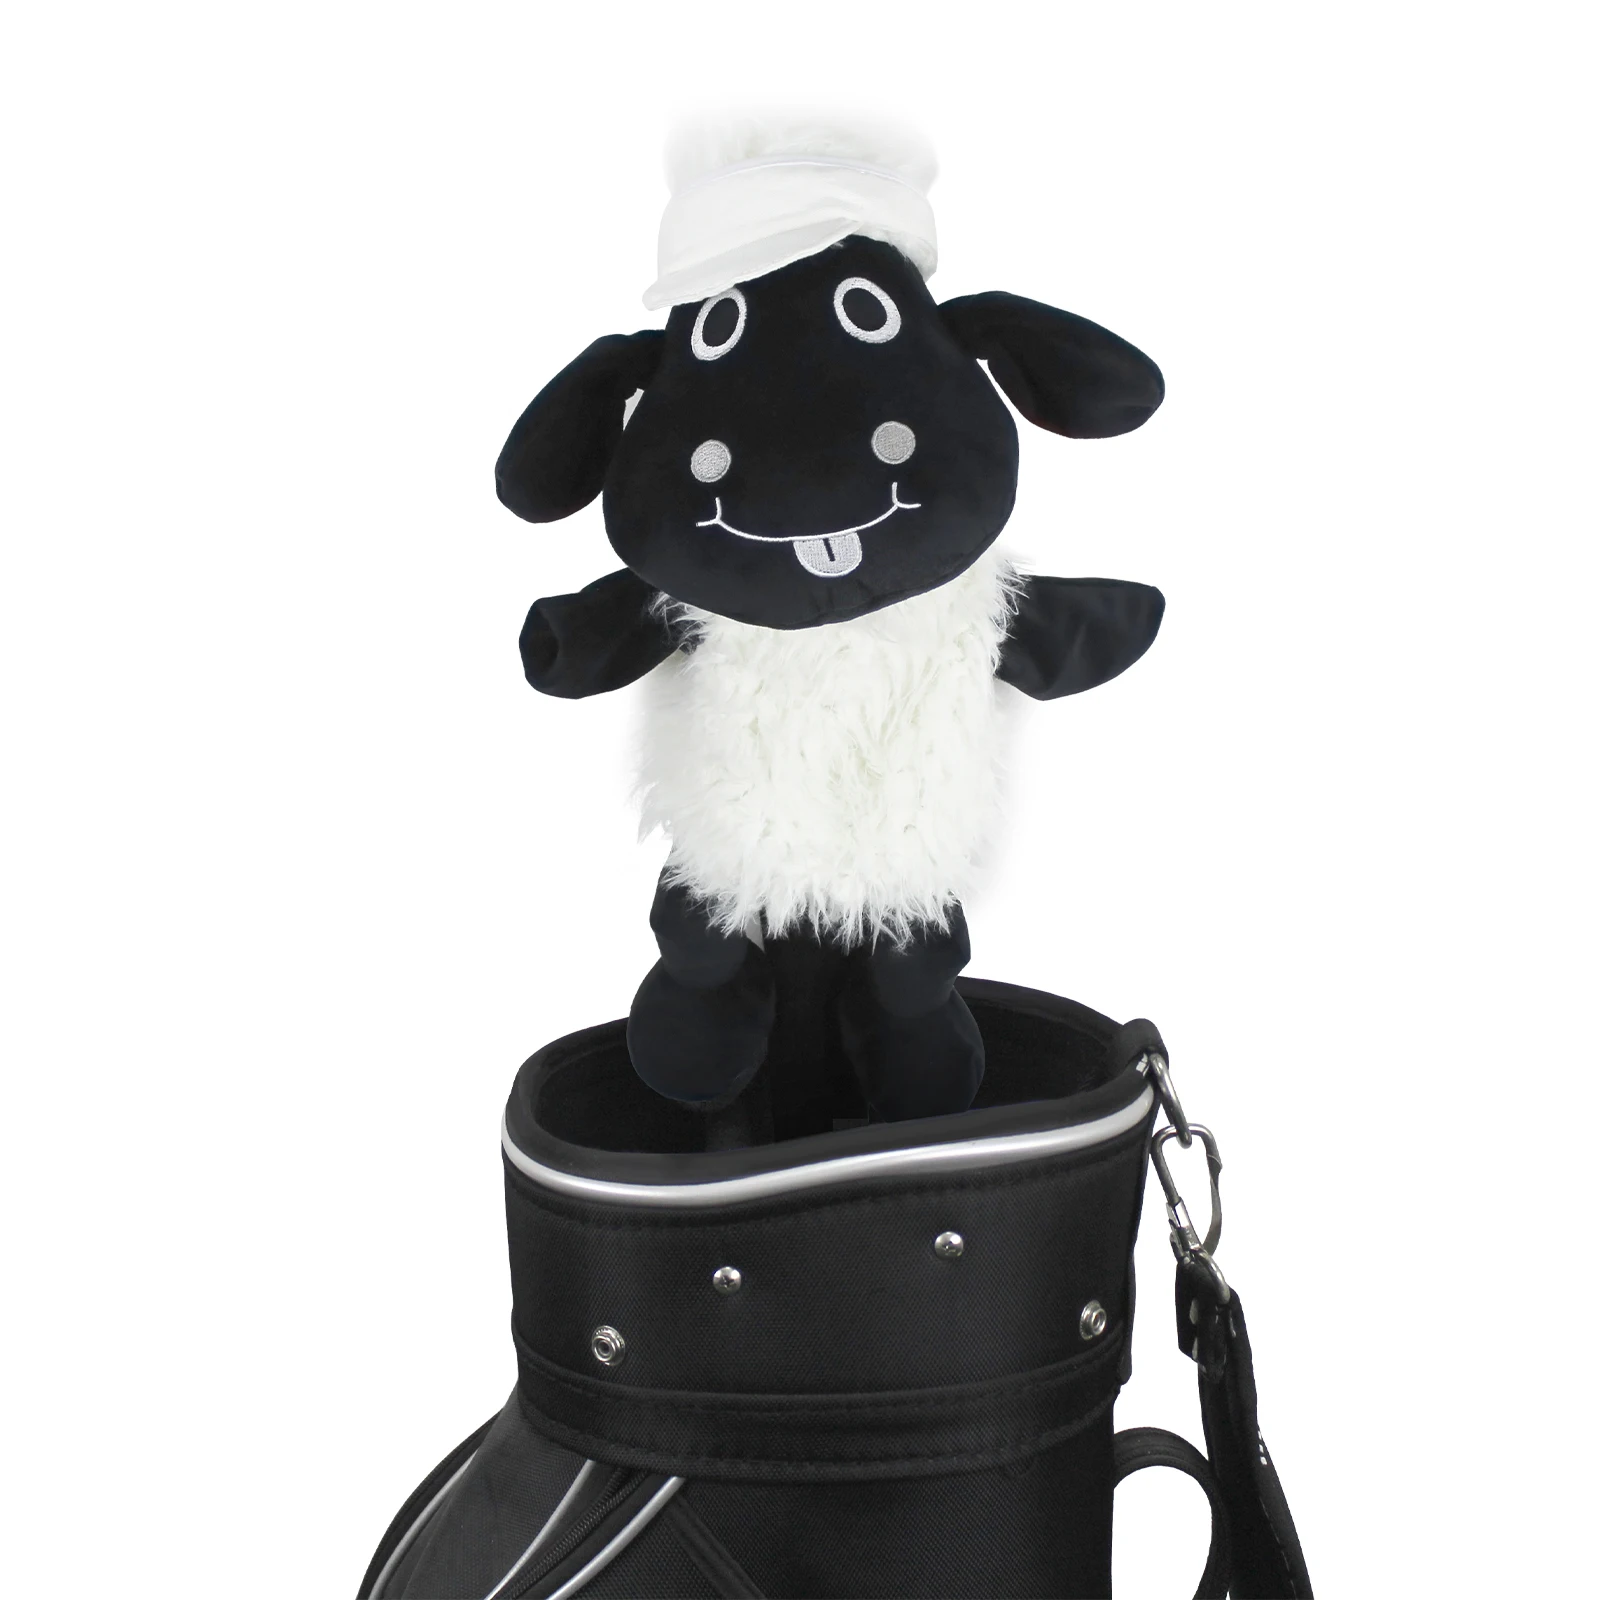 Sheep Animals Golf Head Covers Fit Up To Fairway Woods Men Lady Golf Club Cover Mascot Novelty Cute Gift